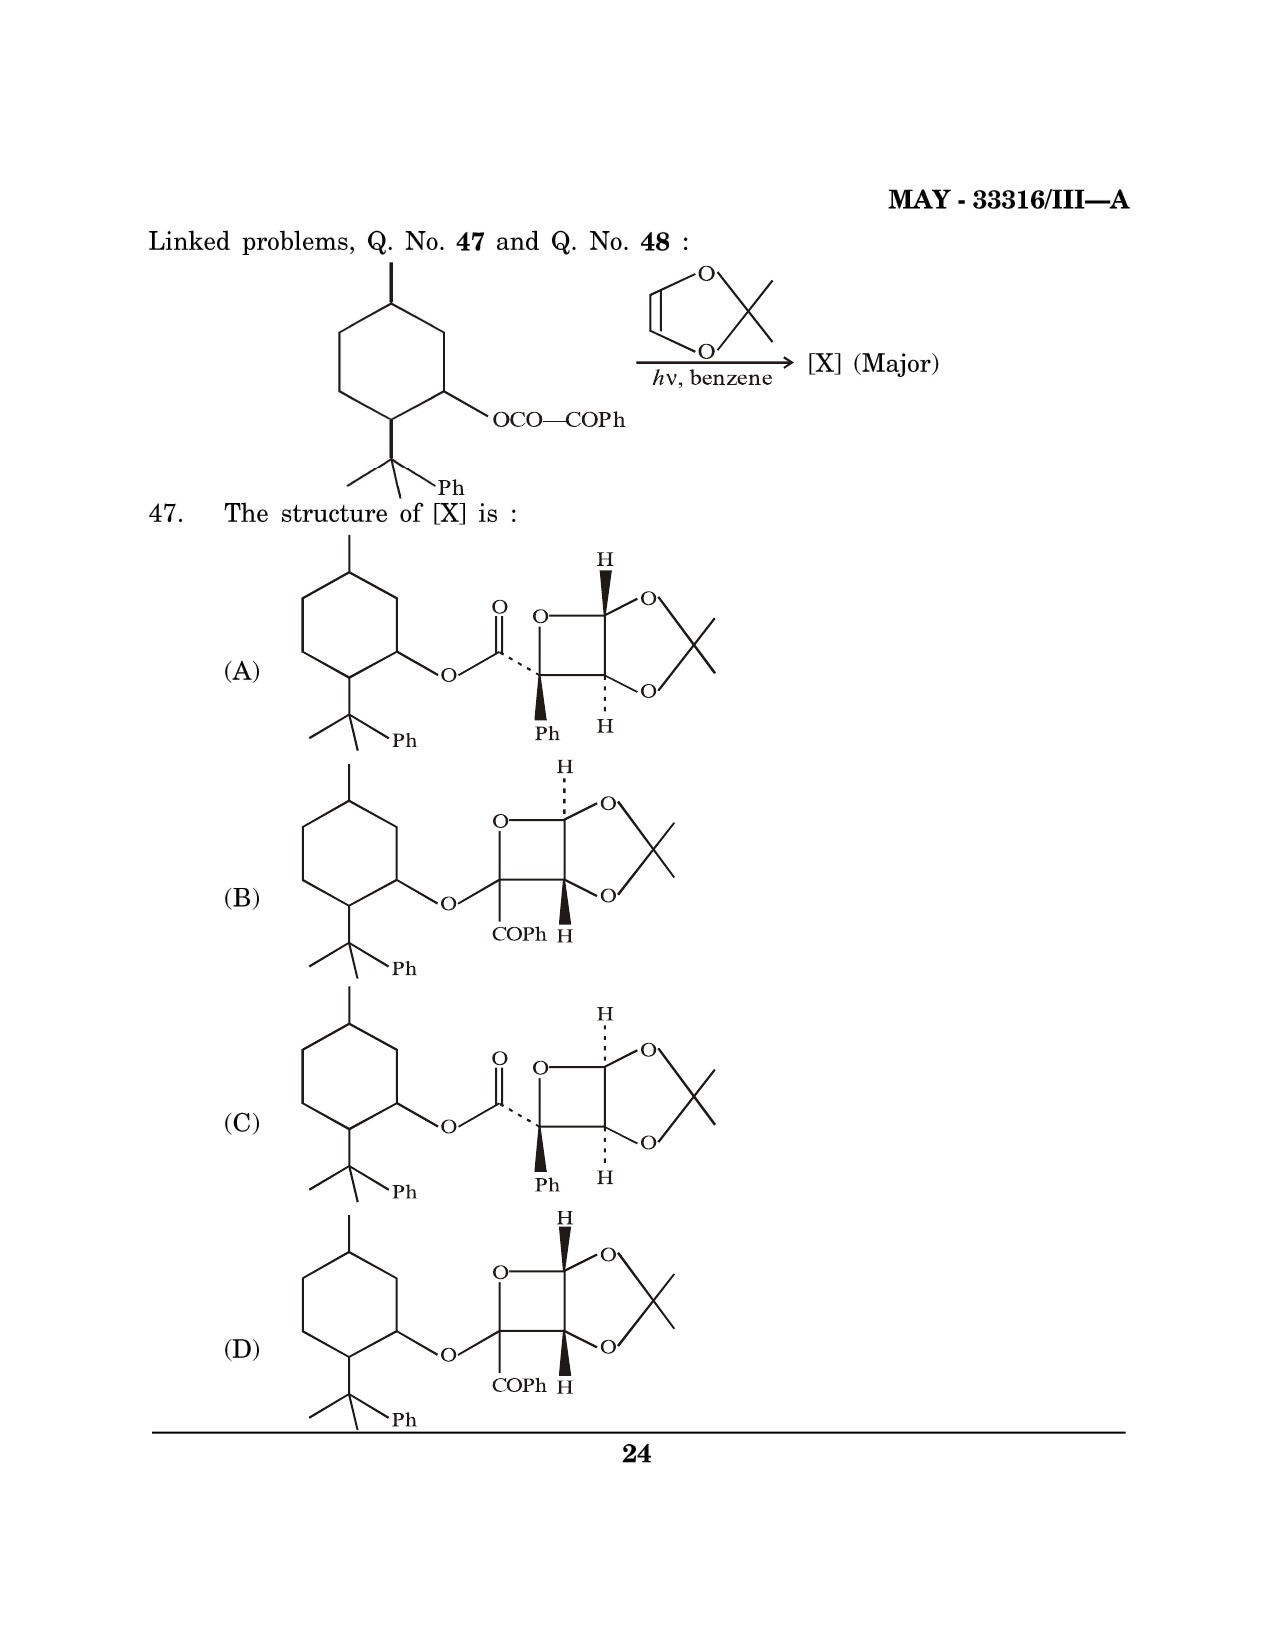 Maharashtra SET Chemical Sciences Question Paper III May 2016 23